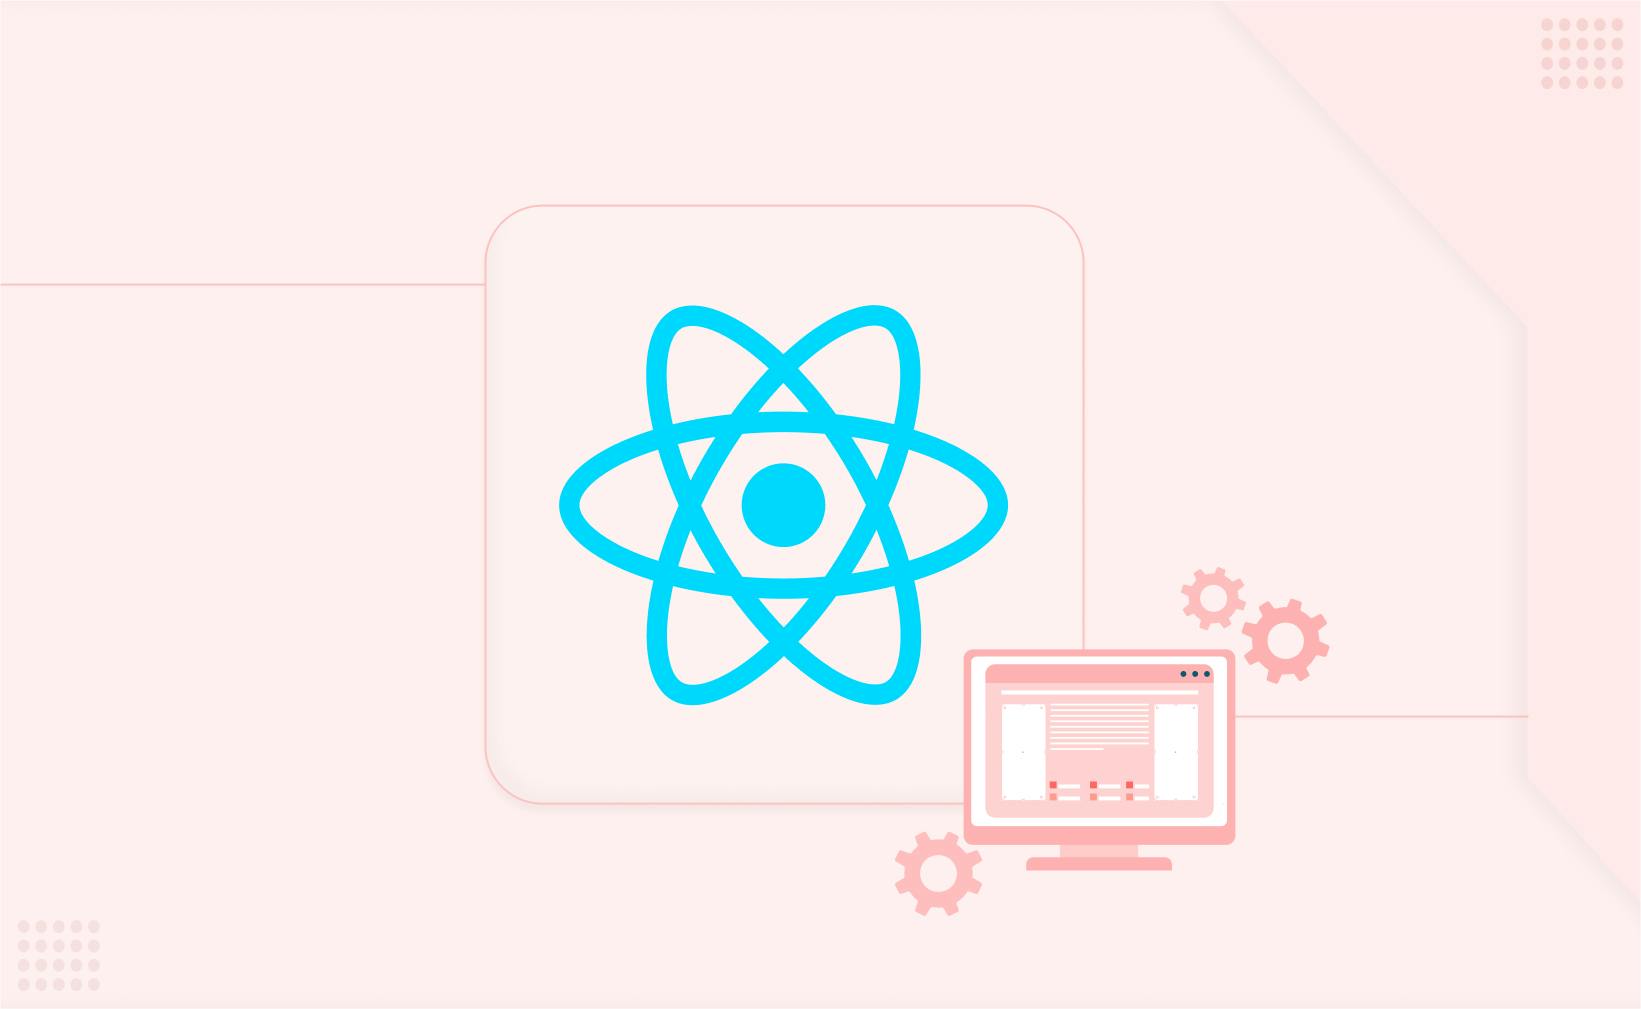 Why Use React: A powerful tool for web development